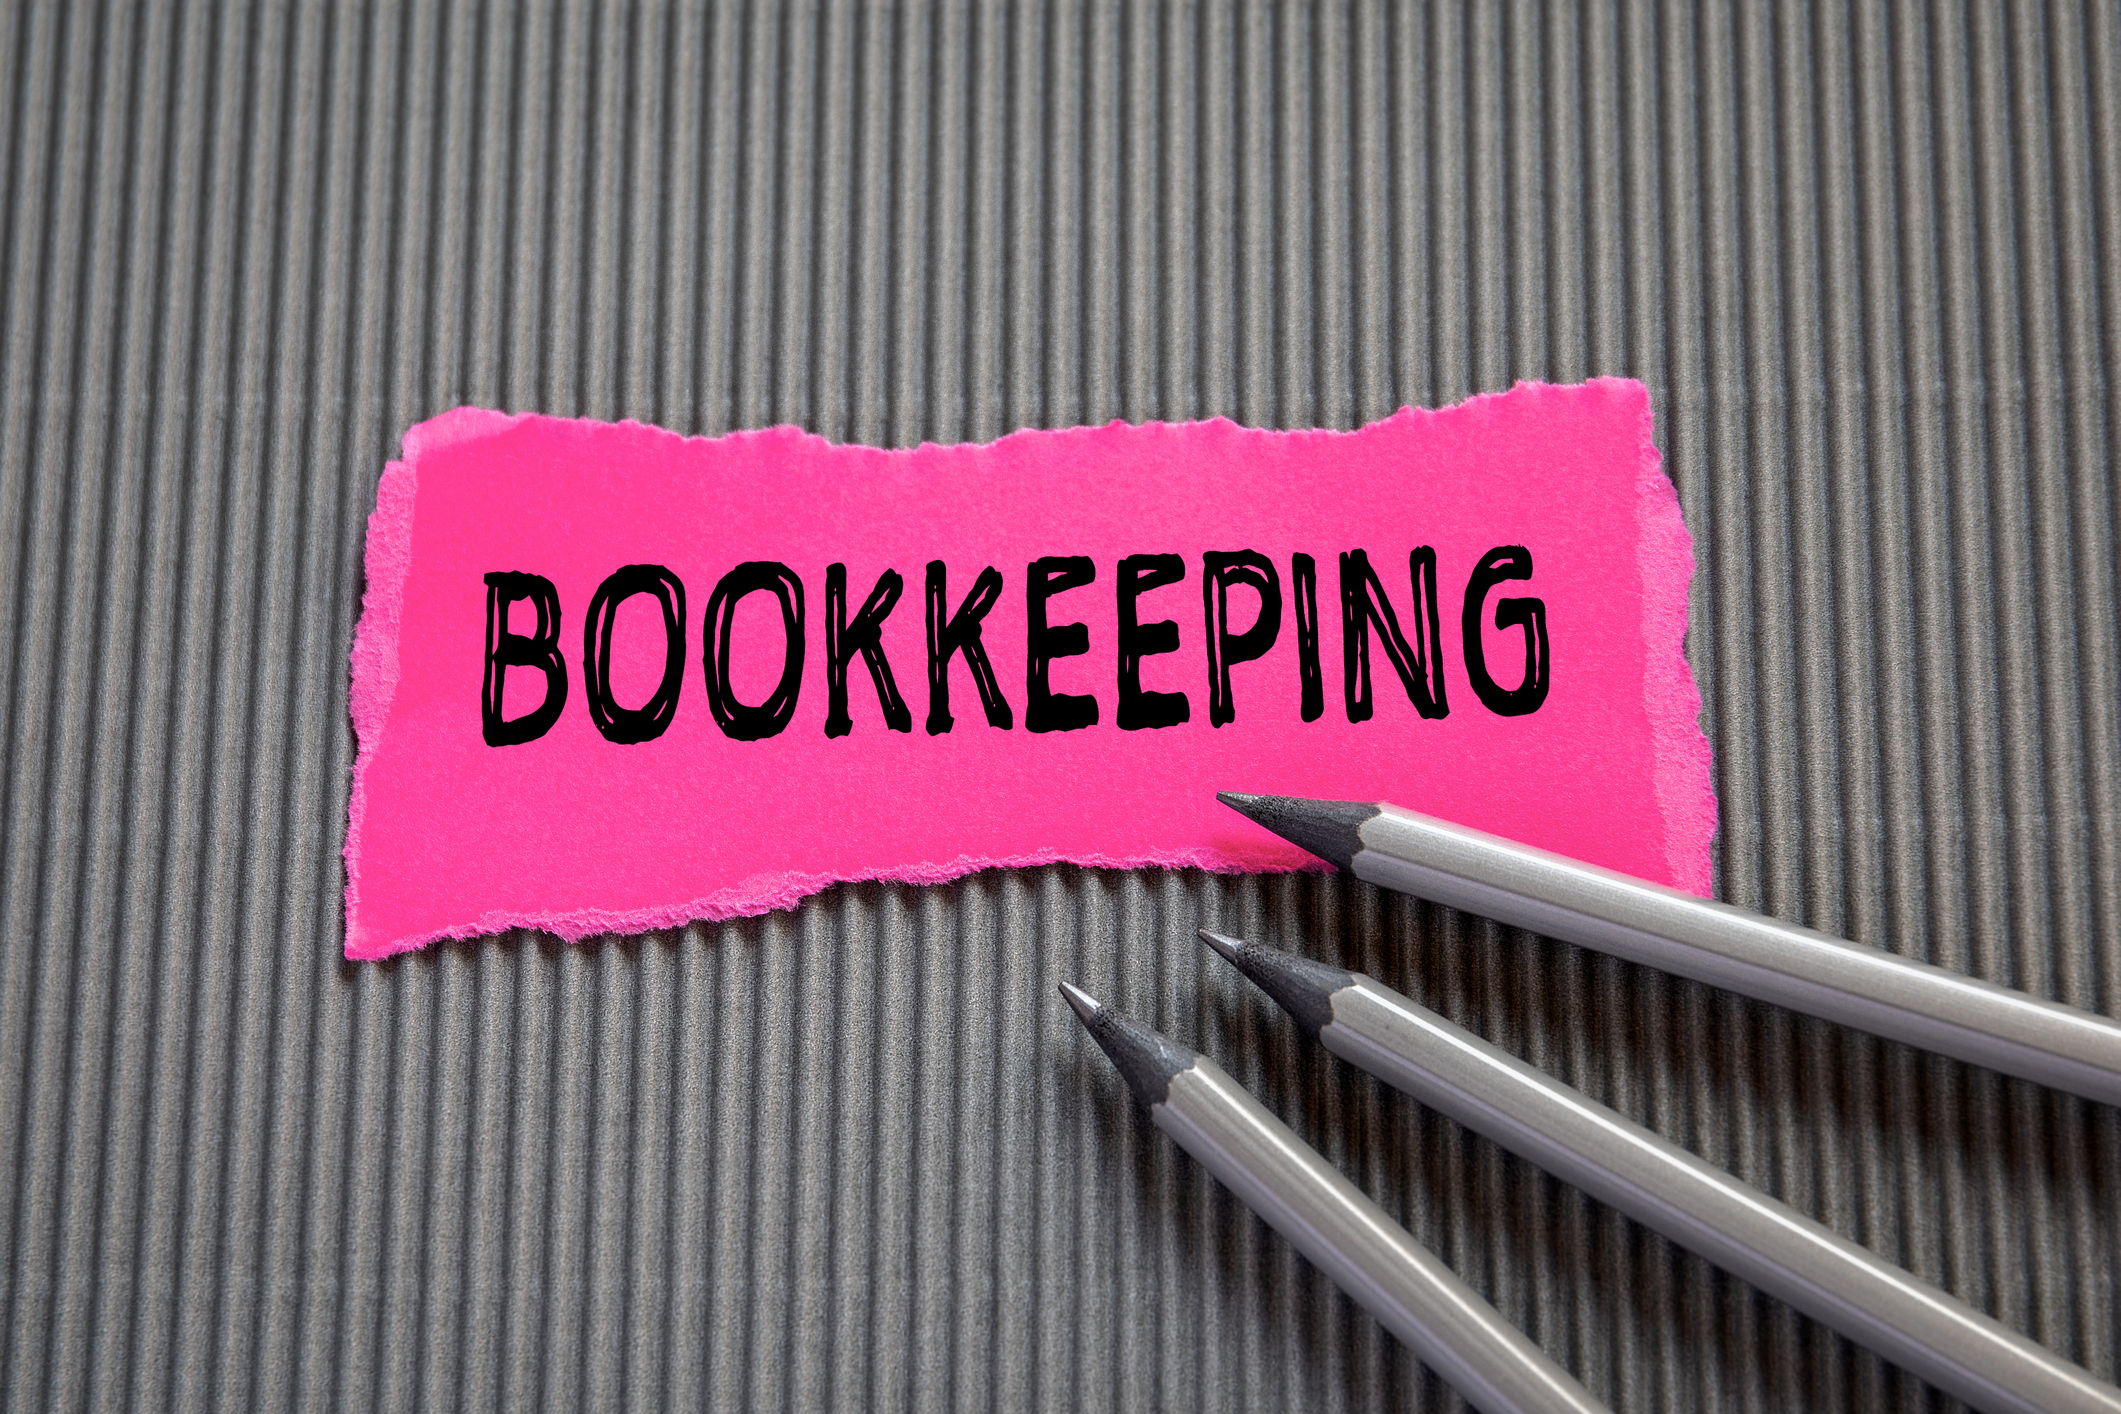 Get Back Into The Bookkeeping Game